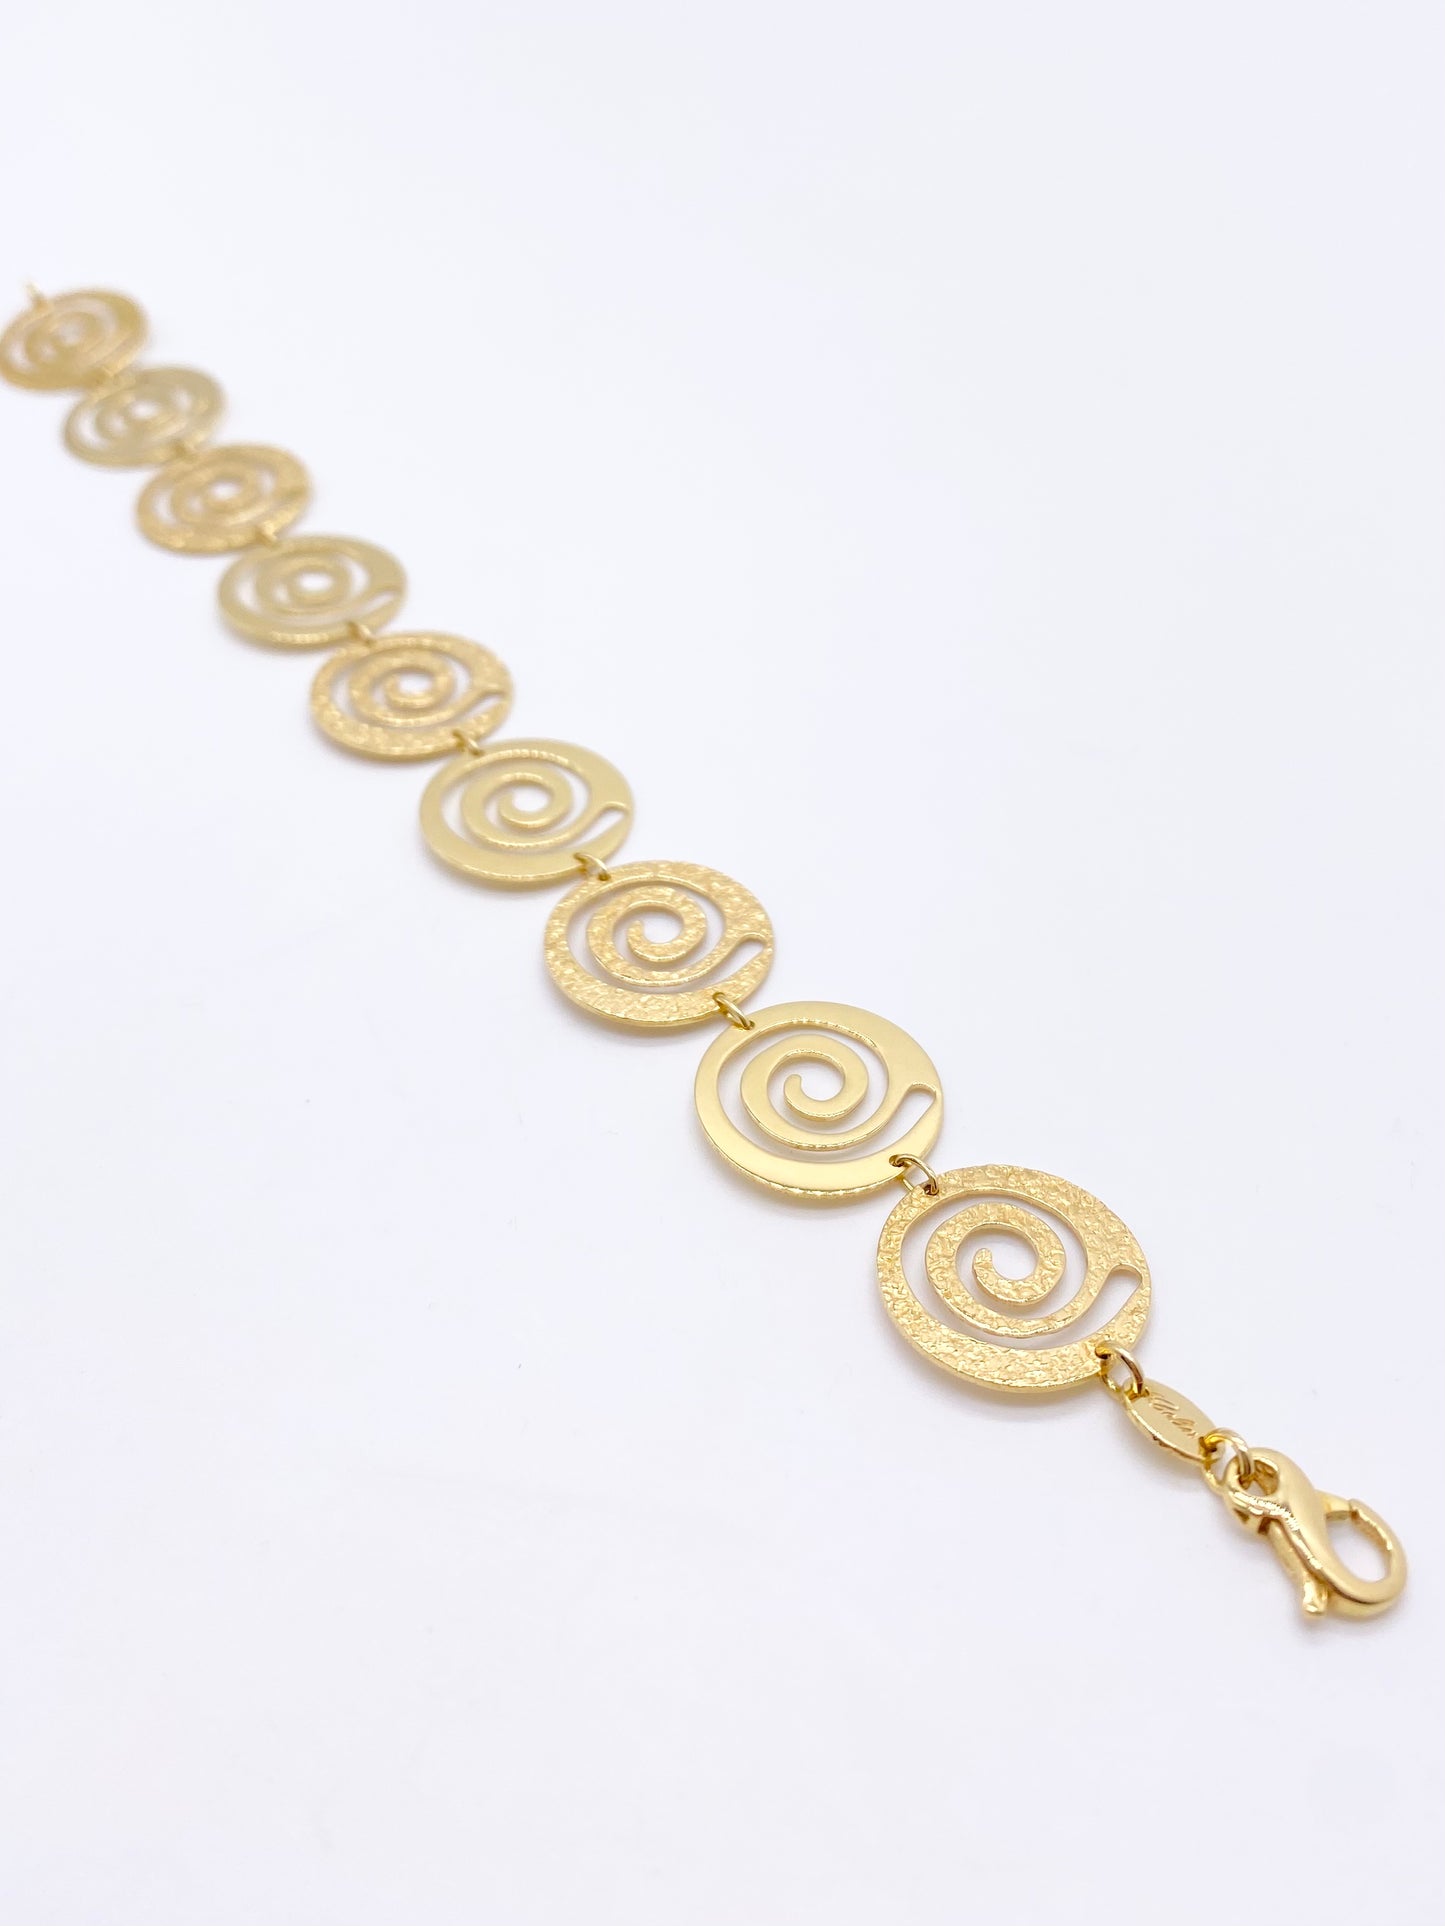 Yellow gold bracelet with spirals